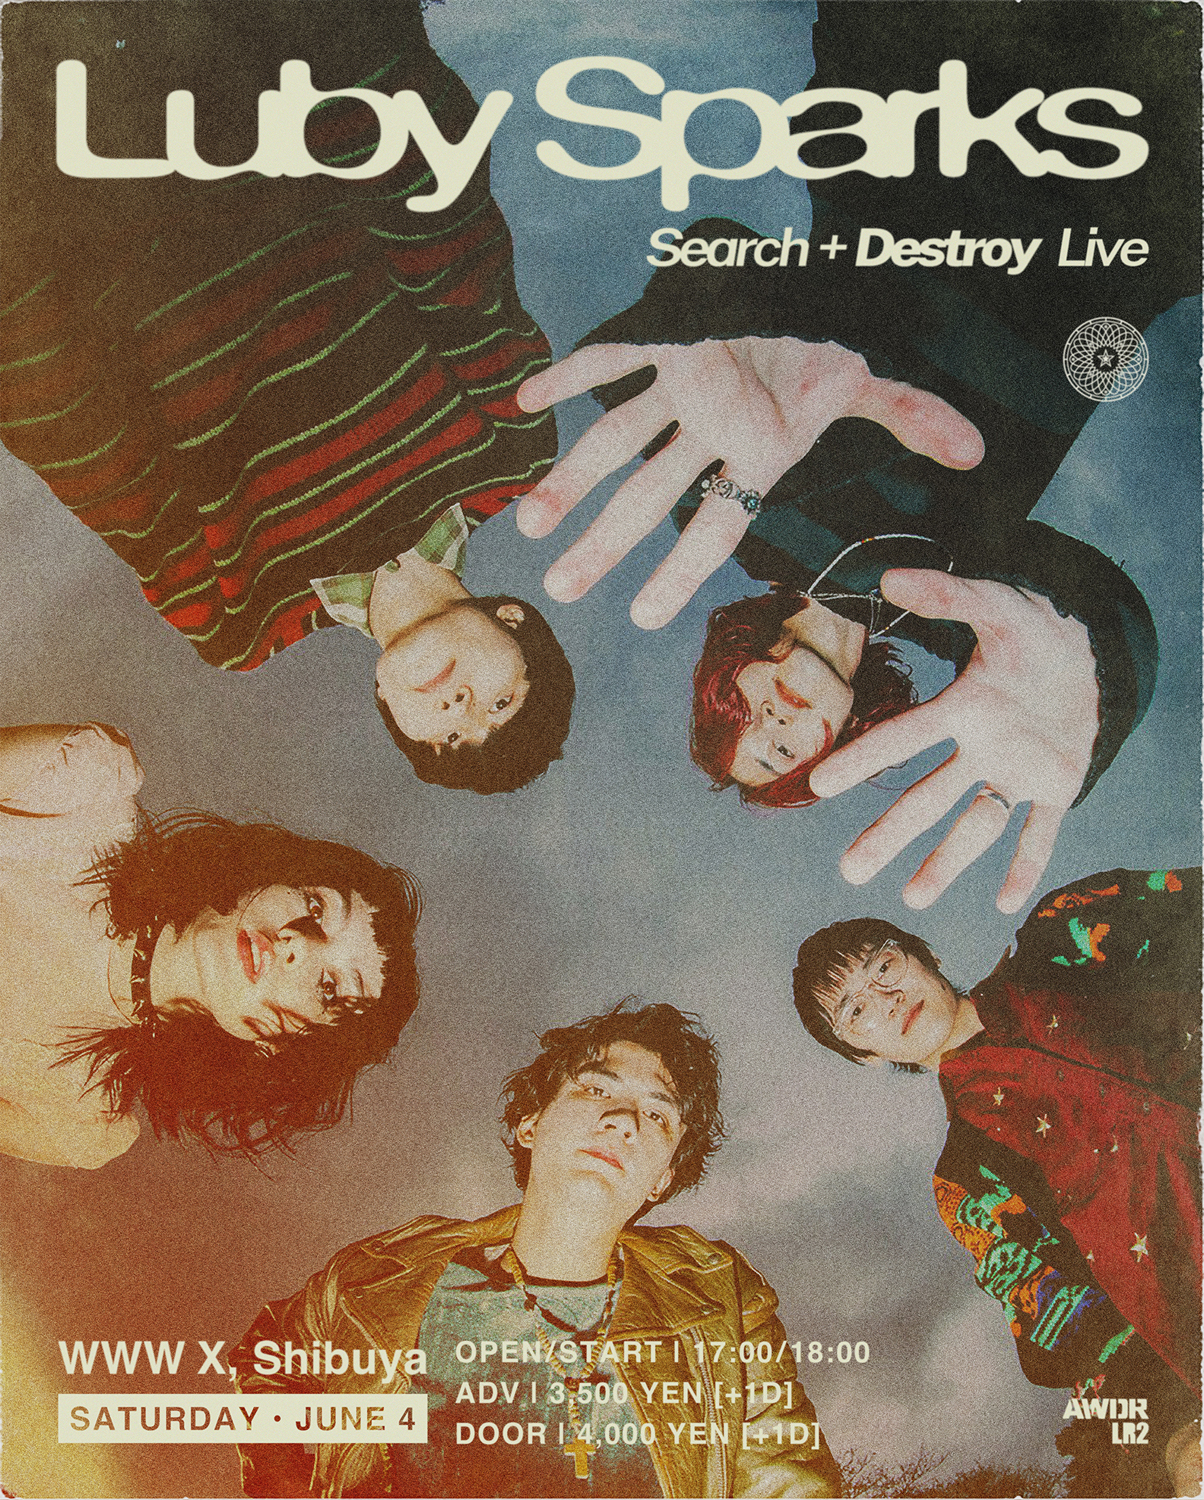 Luby Sparks "Search + Destroy Live"